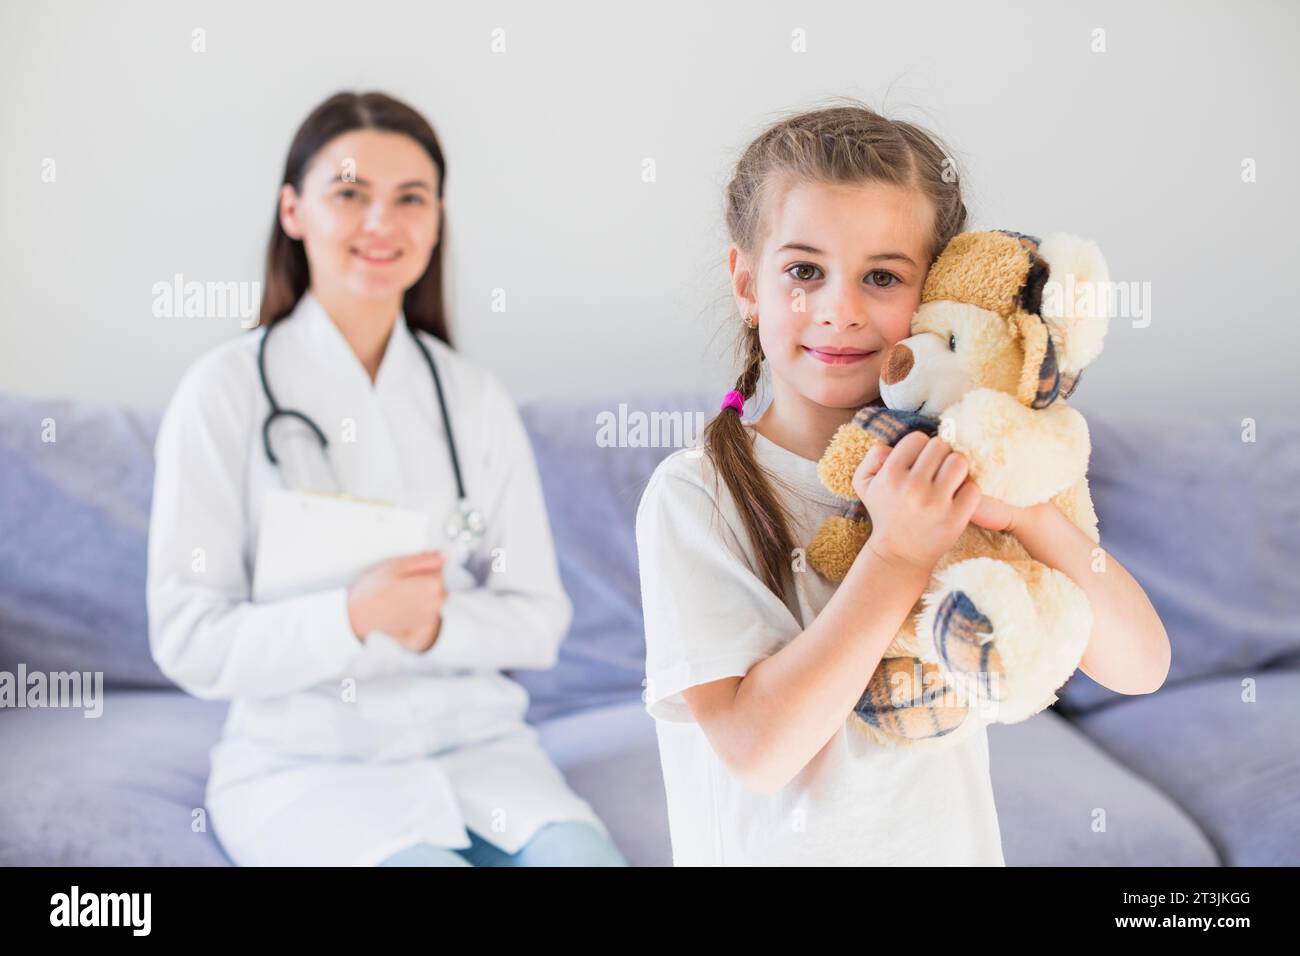 Ill girl being examined by doctor Stock Photo